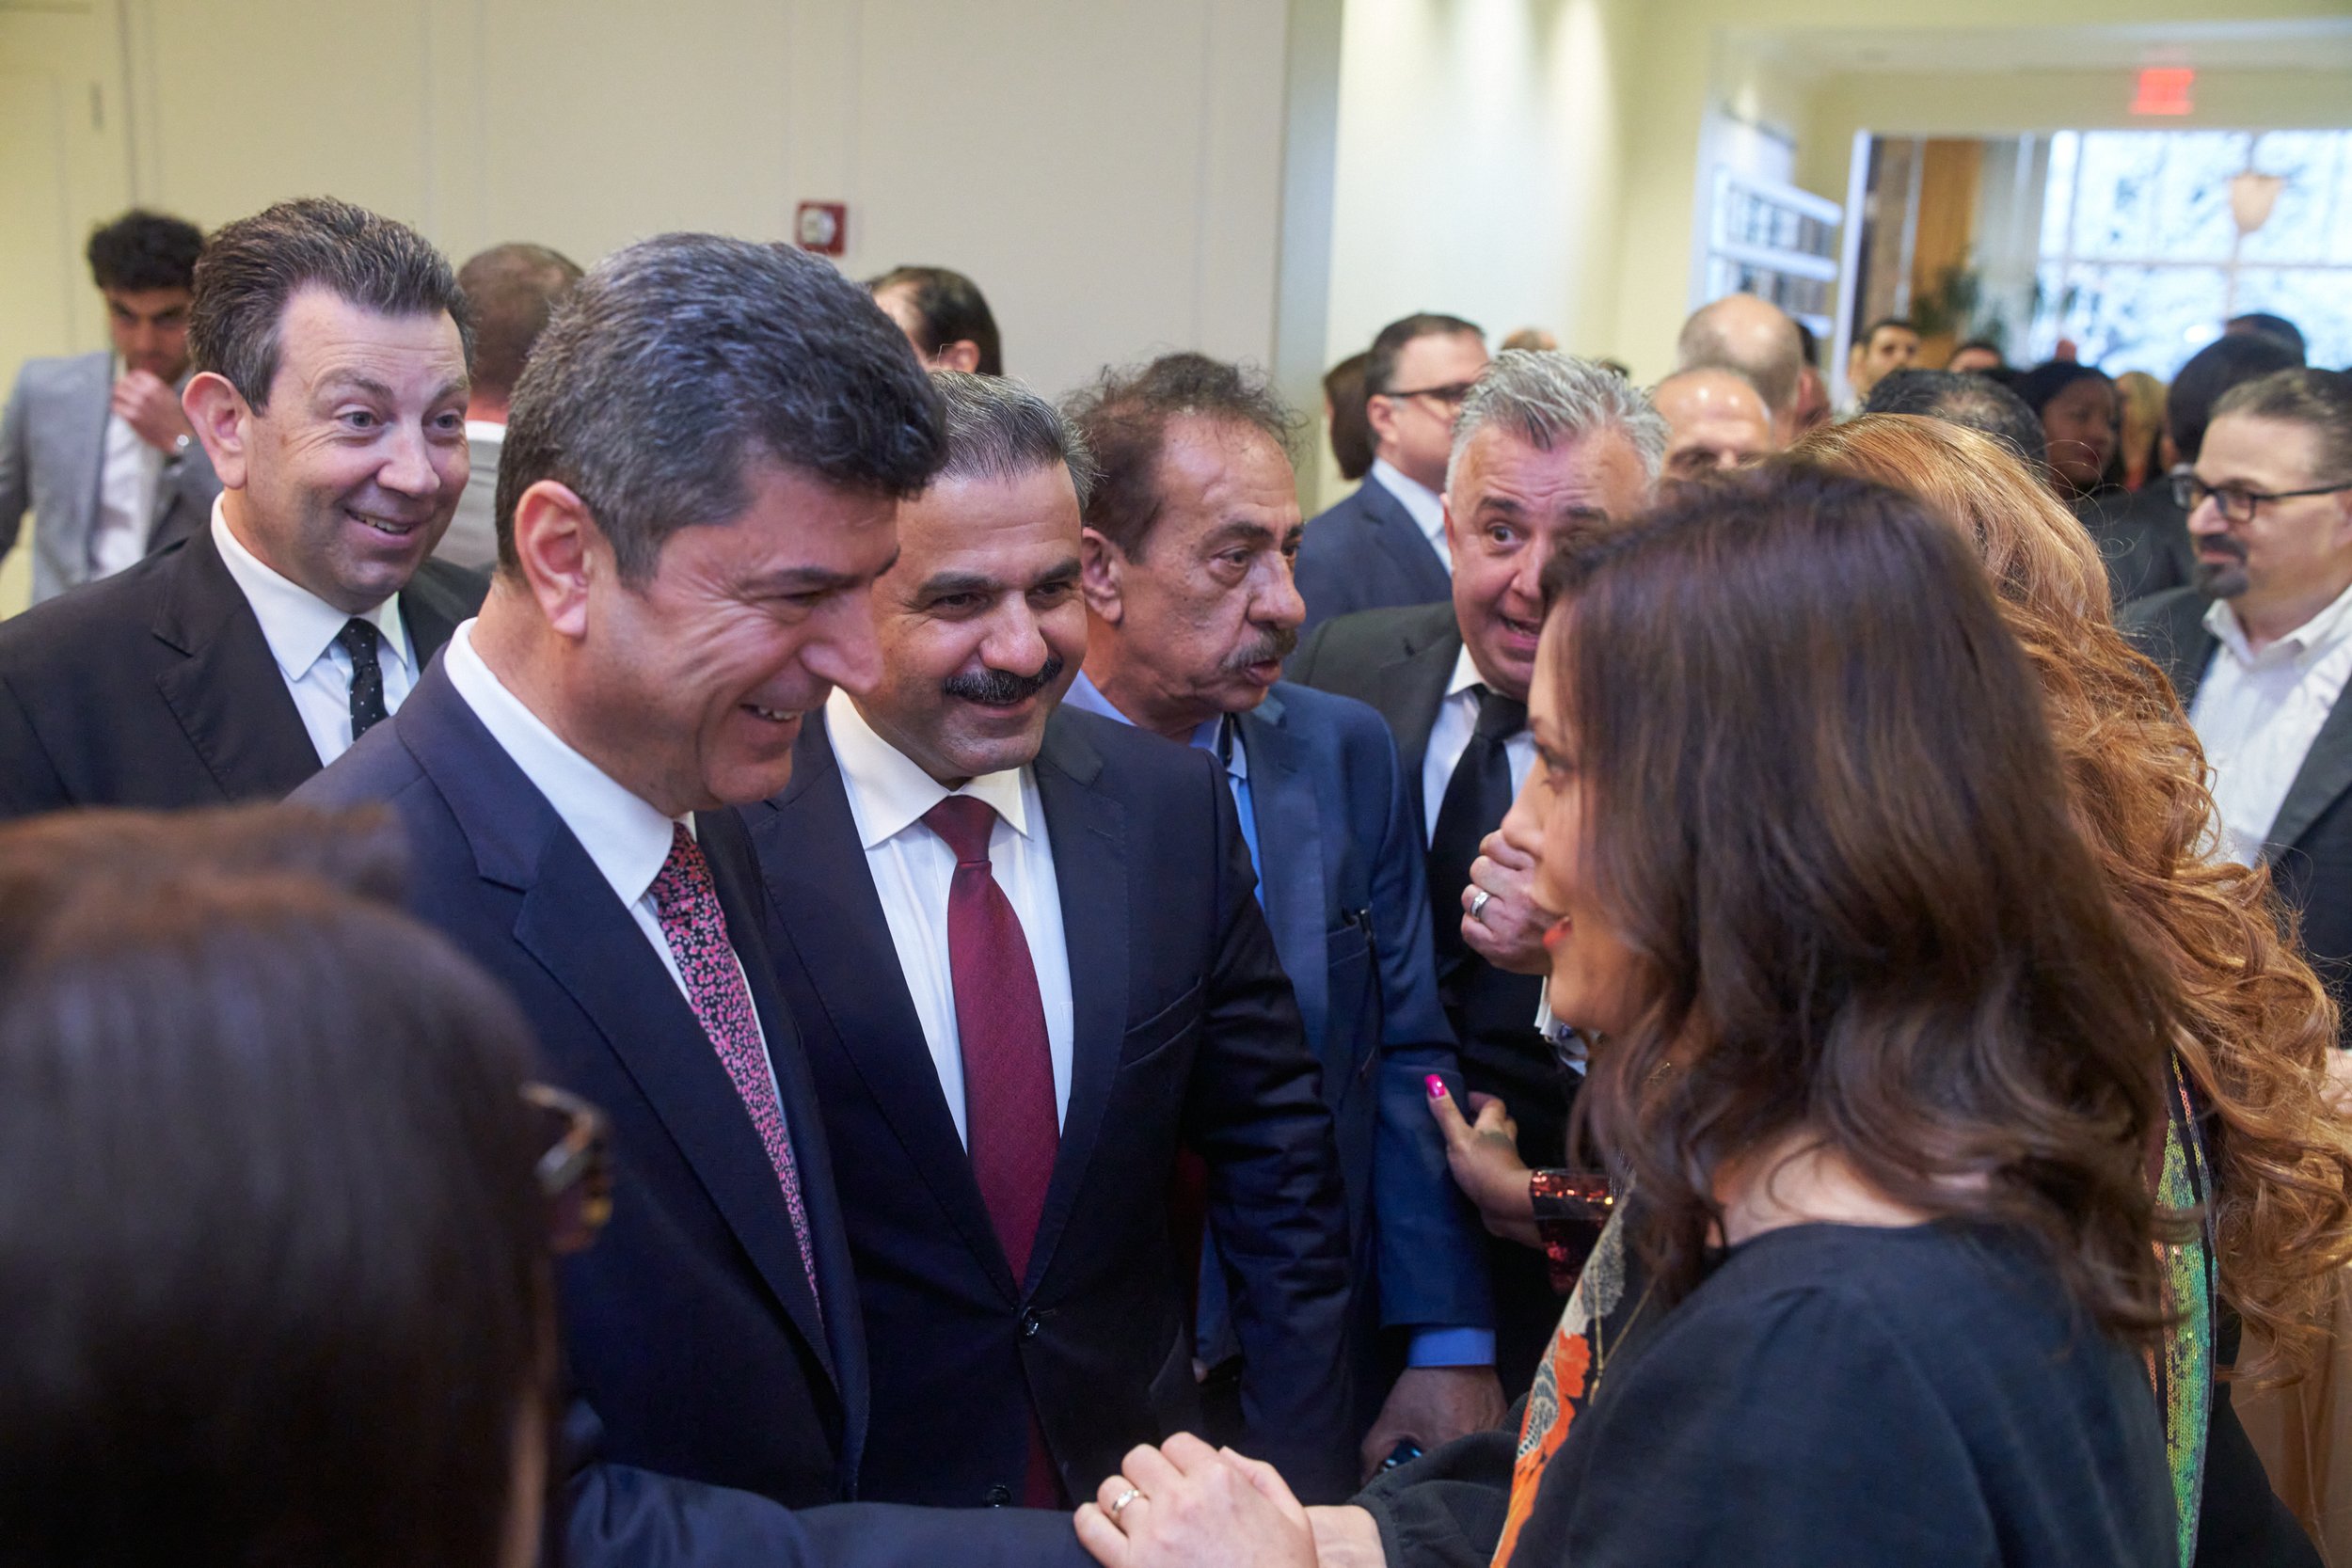  Governor Whitmer meets Dr. Ali Tatar, Governor of Dohuk, an Iraqi city in Nineveh Province, as CACC Board members look on.   